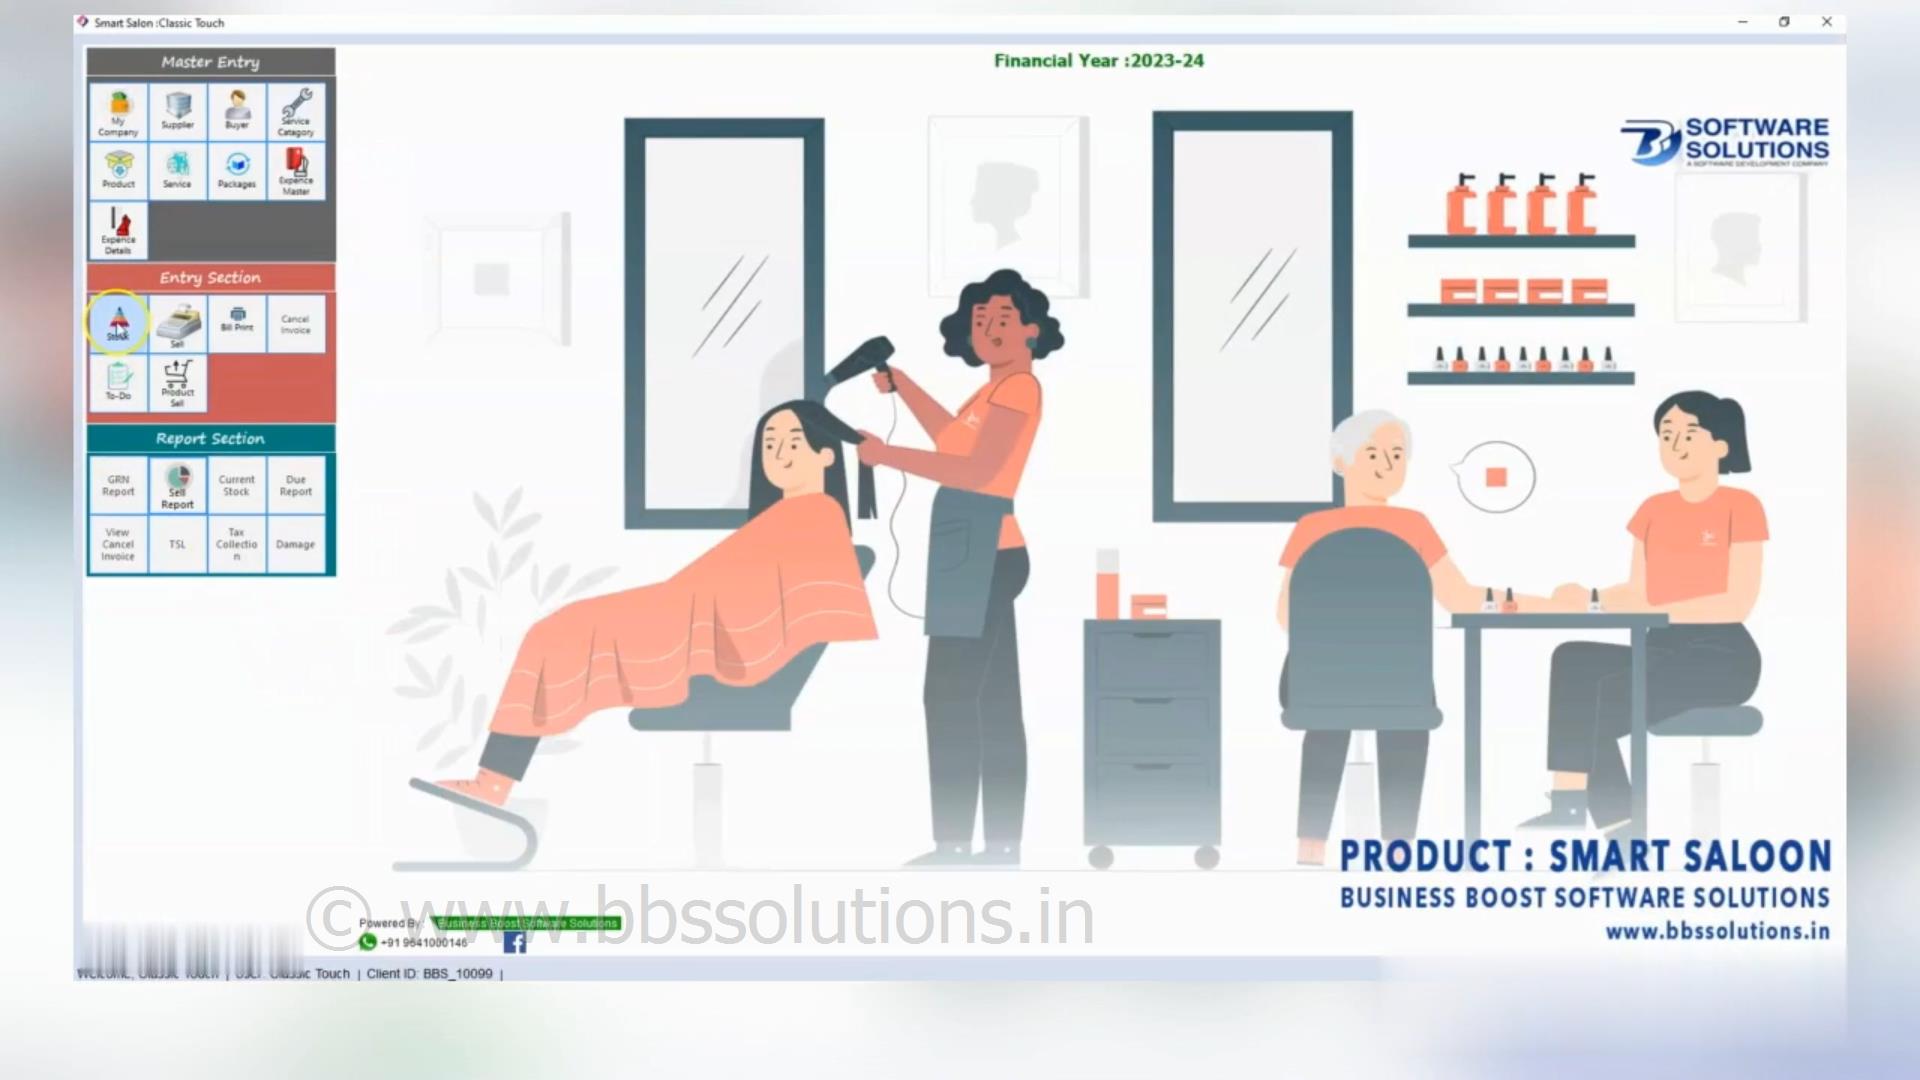 Revolutionize Your Salon with Cloud-Based Designer Salon Management So...  Business Boost Software Solutions do Best Software ,Web Development,Mobile App solutions provider in siliguri , india, WestBengal , Assam , Siliguri , Jalpaiguri ,Dhupguri,
    Best website designing in Siliguri with affordable packages and quick support. Get effective website design in Siliguri from best website designers. #bbssolutions , #SEO  , #DigitalMarketing  , #WebDesign  , #SoftwareDevelopment  , #FacebookAds  , #GoogleAds  , #GoogleSEO  , #WebsiteDesigning 
     , #Software  , #website  , #BusinessBoostSoftwareSolutions  , bbssolutions,SEO, Digital Marketing, WebDesign, Software Development, Facebook Ads, Google Ads, Google SEO, Website Designing, 
    Software, website, Business Boost Software Solutions, 9641000146,7478180650,best GST software in West bengal,Best GST software company in north bengal,GST solution in west bengal
    ,gst solutions in north bengal,best customize software in siliguri , india,best customize software in west bengal,best customize software in dhupguri,news portal website in west bengal
    ,news portal website in siliguri , india,regional news portal website in siliguri , india,school software in west bengal,school software in north bengal,school website in north bengal,
    school software in north bengal,android app, ios app, ecommerce website, ecommerce software,Web designing, website designing, ecommerce website, how to make website, create website, 
    website development company, web page design, seo, search engine optimization, seo siliguri , india , 
    seo company, best seo company, seo services, responsive web design, web designing companies, 
    how to create a website, internet marketing, digital marketing, online marketing, social media marketing, 
    promotion,web designing in Siliguri,web designing in Siliguri siliguri , india,web designing in siliguri , india,GST Software  ,  GST Billing Software  ,  GST Accounting  ,  GST Ready Software,
    software company in siliguri,software company in siliguri siliguri , india,software company in north east siliguri , india,
    school software in siliguri,school software in north east siliguri , india,customize software,free software demo,
    reasonable price software,cost effective software,resonable price software,free demo software,free software,best software support,free software support,best software company in siliguri , india,
    best software company in siliguri,MLM Software company in Siliguri,Binary Software company in Siliguri,
    top ten software company in north bengal,top ten software company in siliguri,top ten software company in siliguri , india,
    top ten software company in north east,software development siliguri , india,west bengal,kolkata,siliguri , software company in siliguri , india
     , software development west bengal , Customized software siliguri , india , software for hotel,medicine distributors,
    jewellery shop , best software company in siliguri,jalpaiguri,sikkim,darjeeling  , Business Boost Softwate Solutions  ,  
    Web designing company in siliguri  ,  ecommerce designing company in siliguri  ,  web development company in siliguri  ,  
    software development comapny in siliguri  ,  software development in sikkim  ,  website designing company in sikkim  ,  
    SEO service in sikkim  ,  web designing company in siliguri  ,  web designing compnay in North Bengal  ,  
    SEO service in siliguri  ,  web designing in north bengal  ,  web designing in north east siliguri , india , website designing in siliguri, best website designing in siliguri, web design, web designer in siliguri, web designing company siliguri